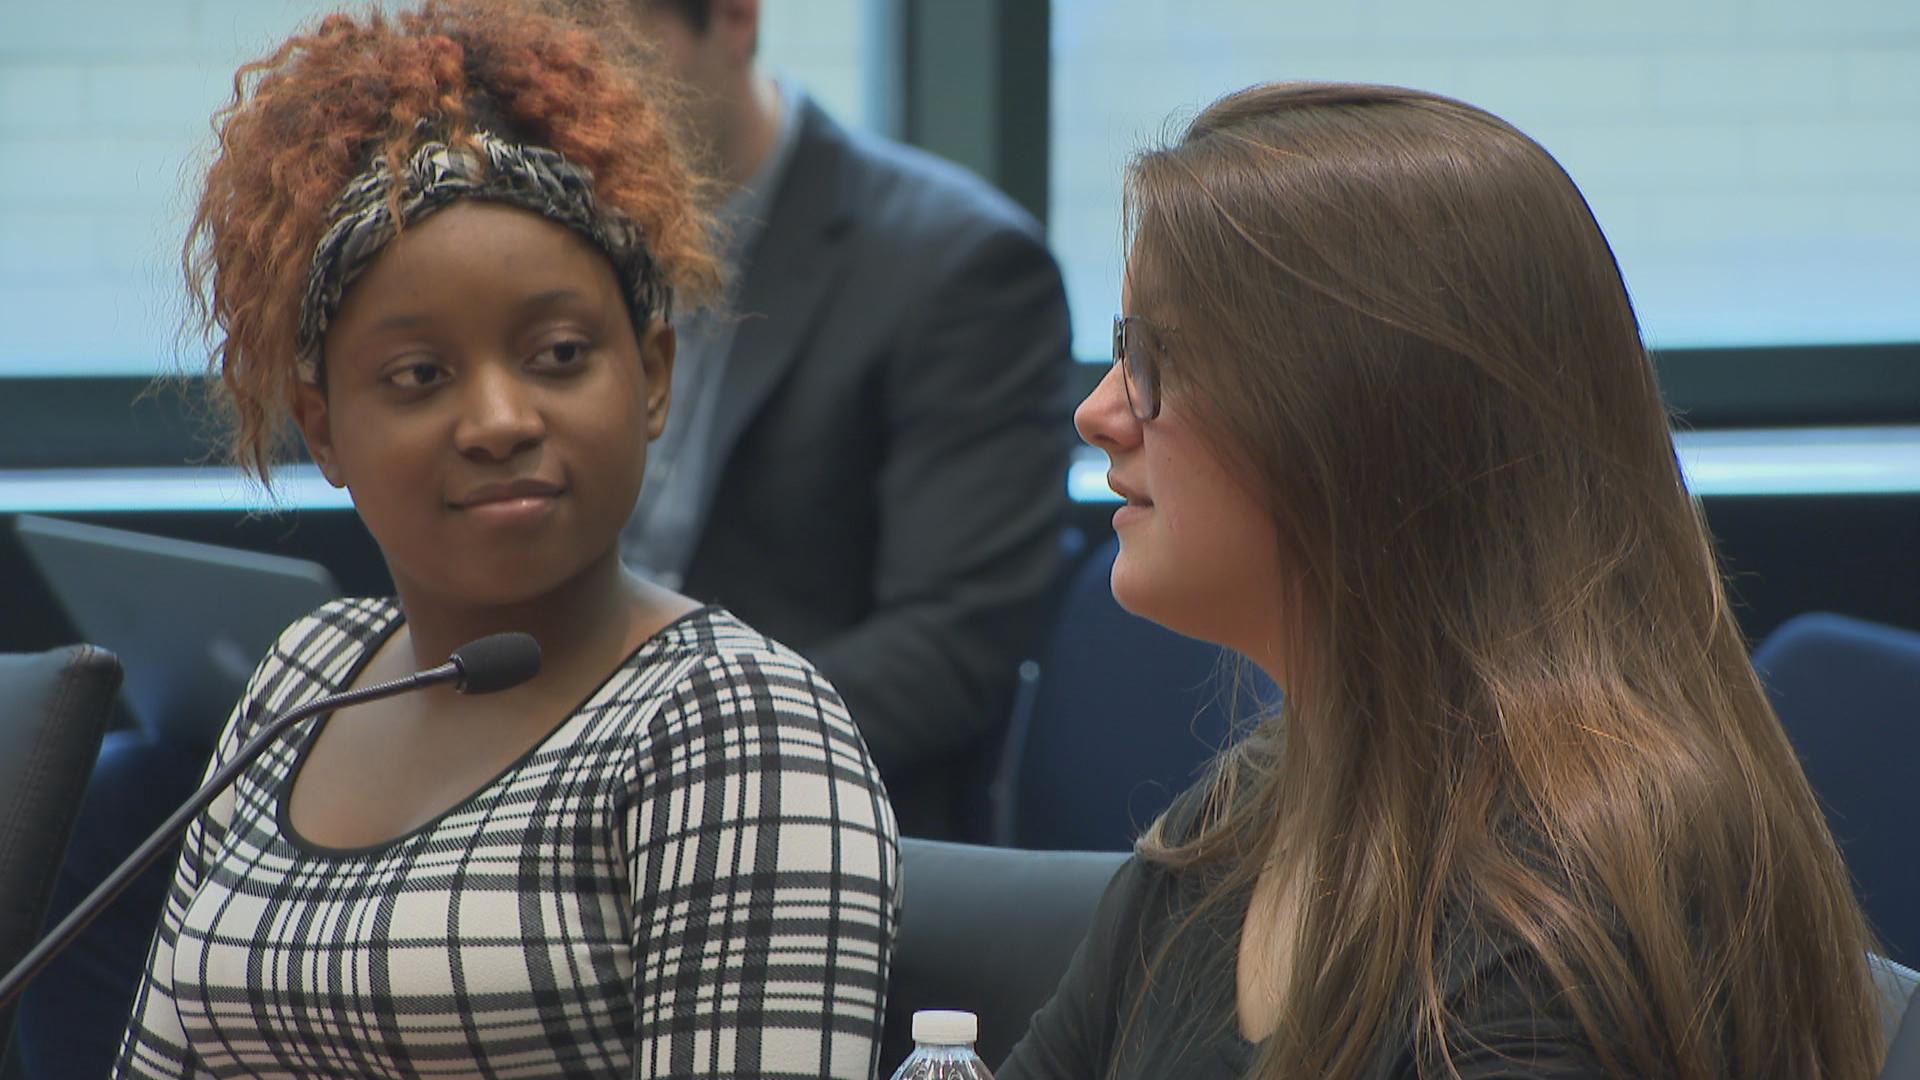 Former Chicago Public Schools students Tamara Reed, left, and Morgan Aranda testify Wednesday, June 20, 2018 at a hearing on the district’s handling of sexual abuse allegations. (Chicago Tonight)